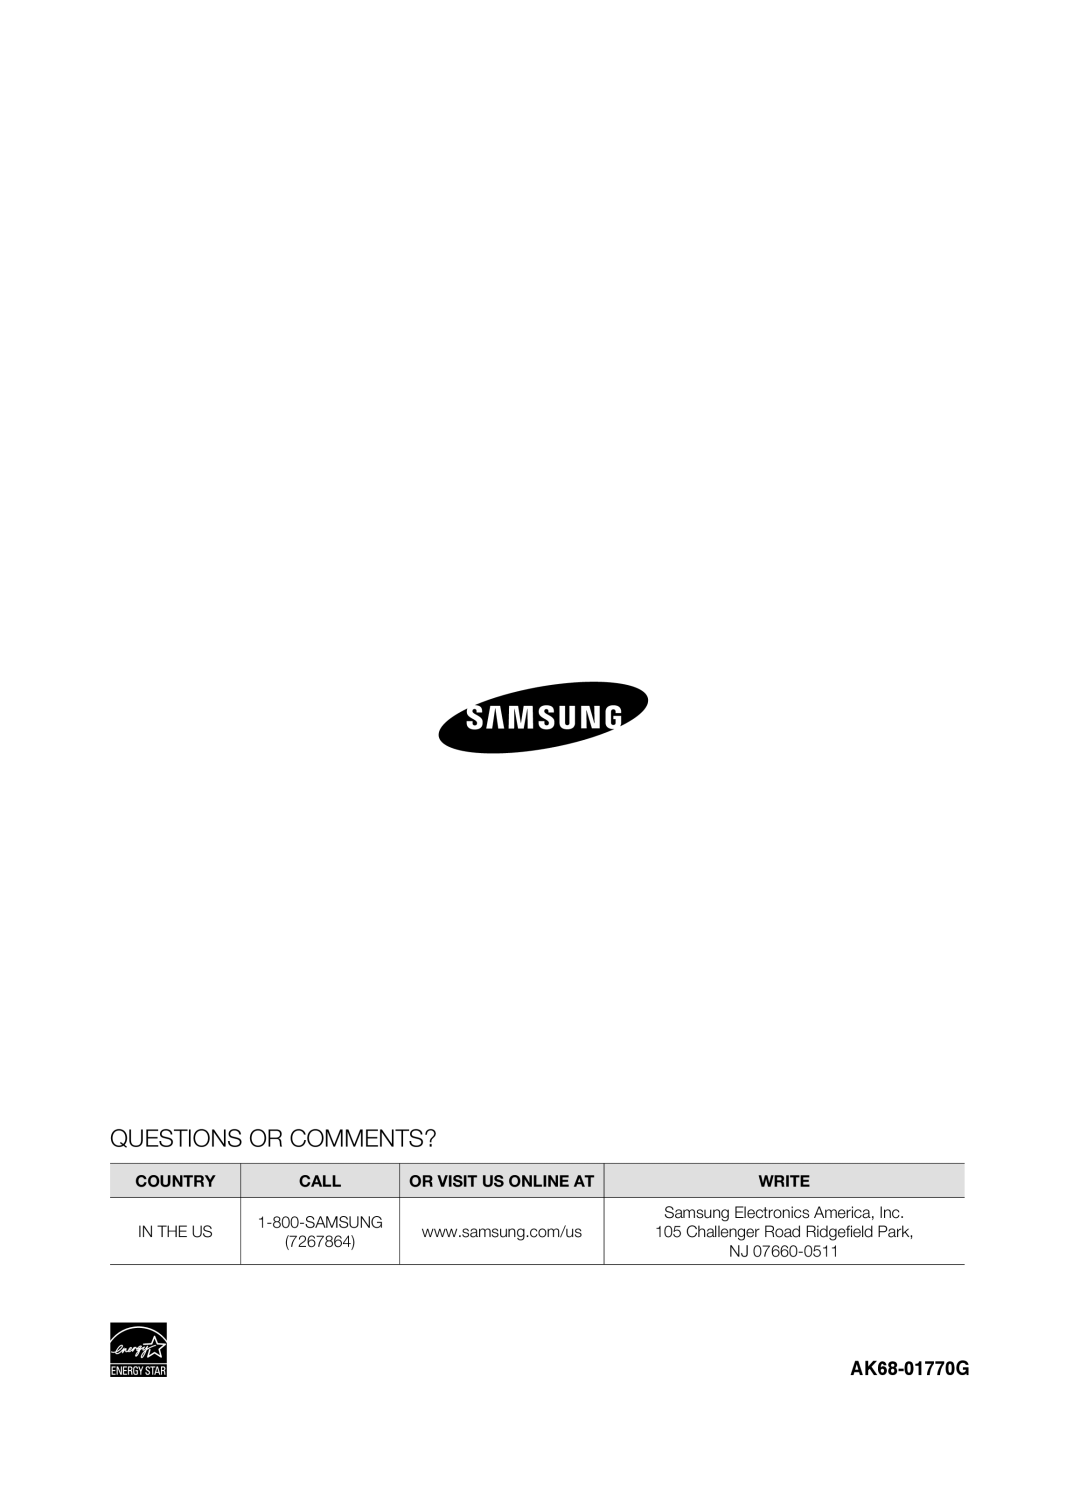 Samsung DVD-P390 user manual Questions Or Comments?, AK68-01770G, Country, Call, Or Visit Us Online At, Write 